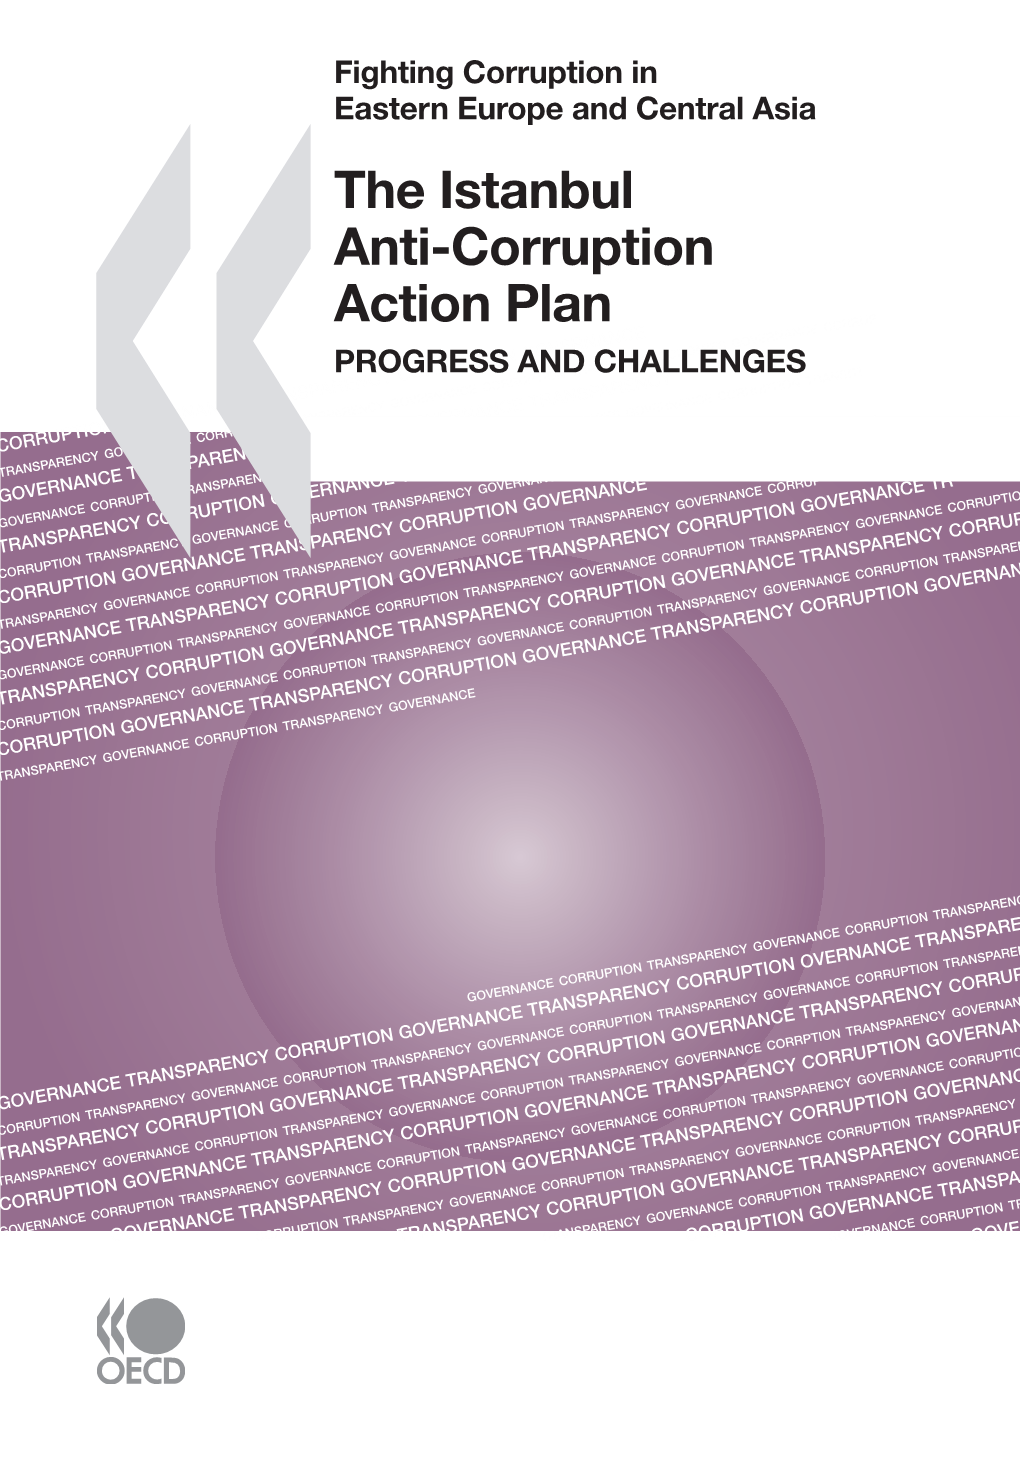 Fighting Corruption in Eastern Europe and Central Asia